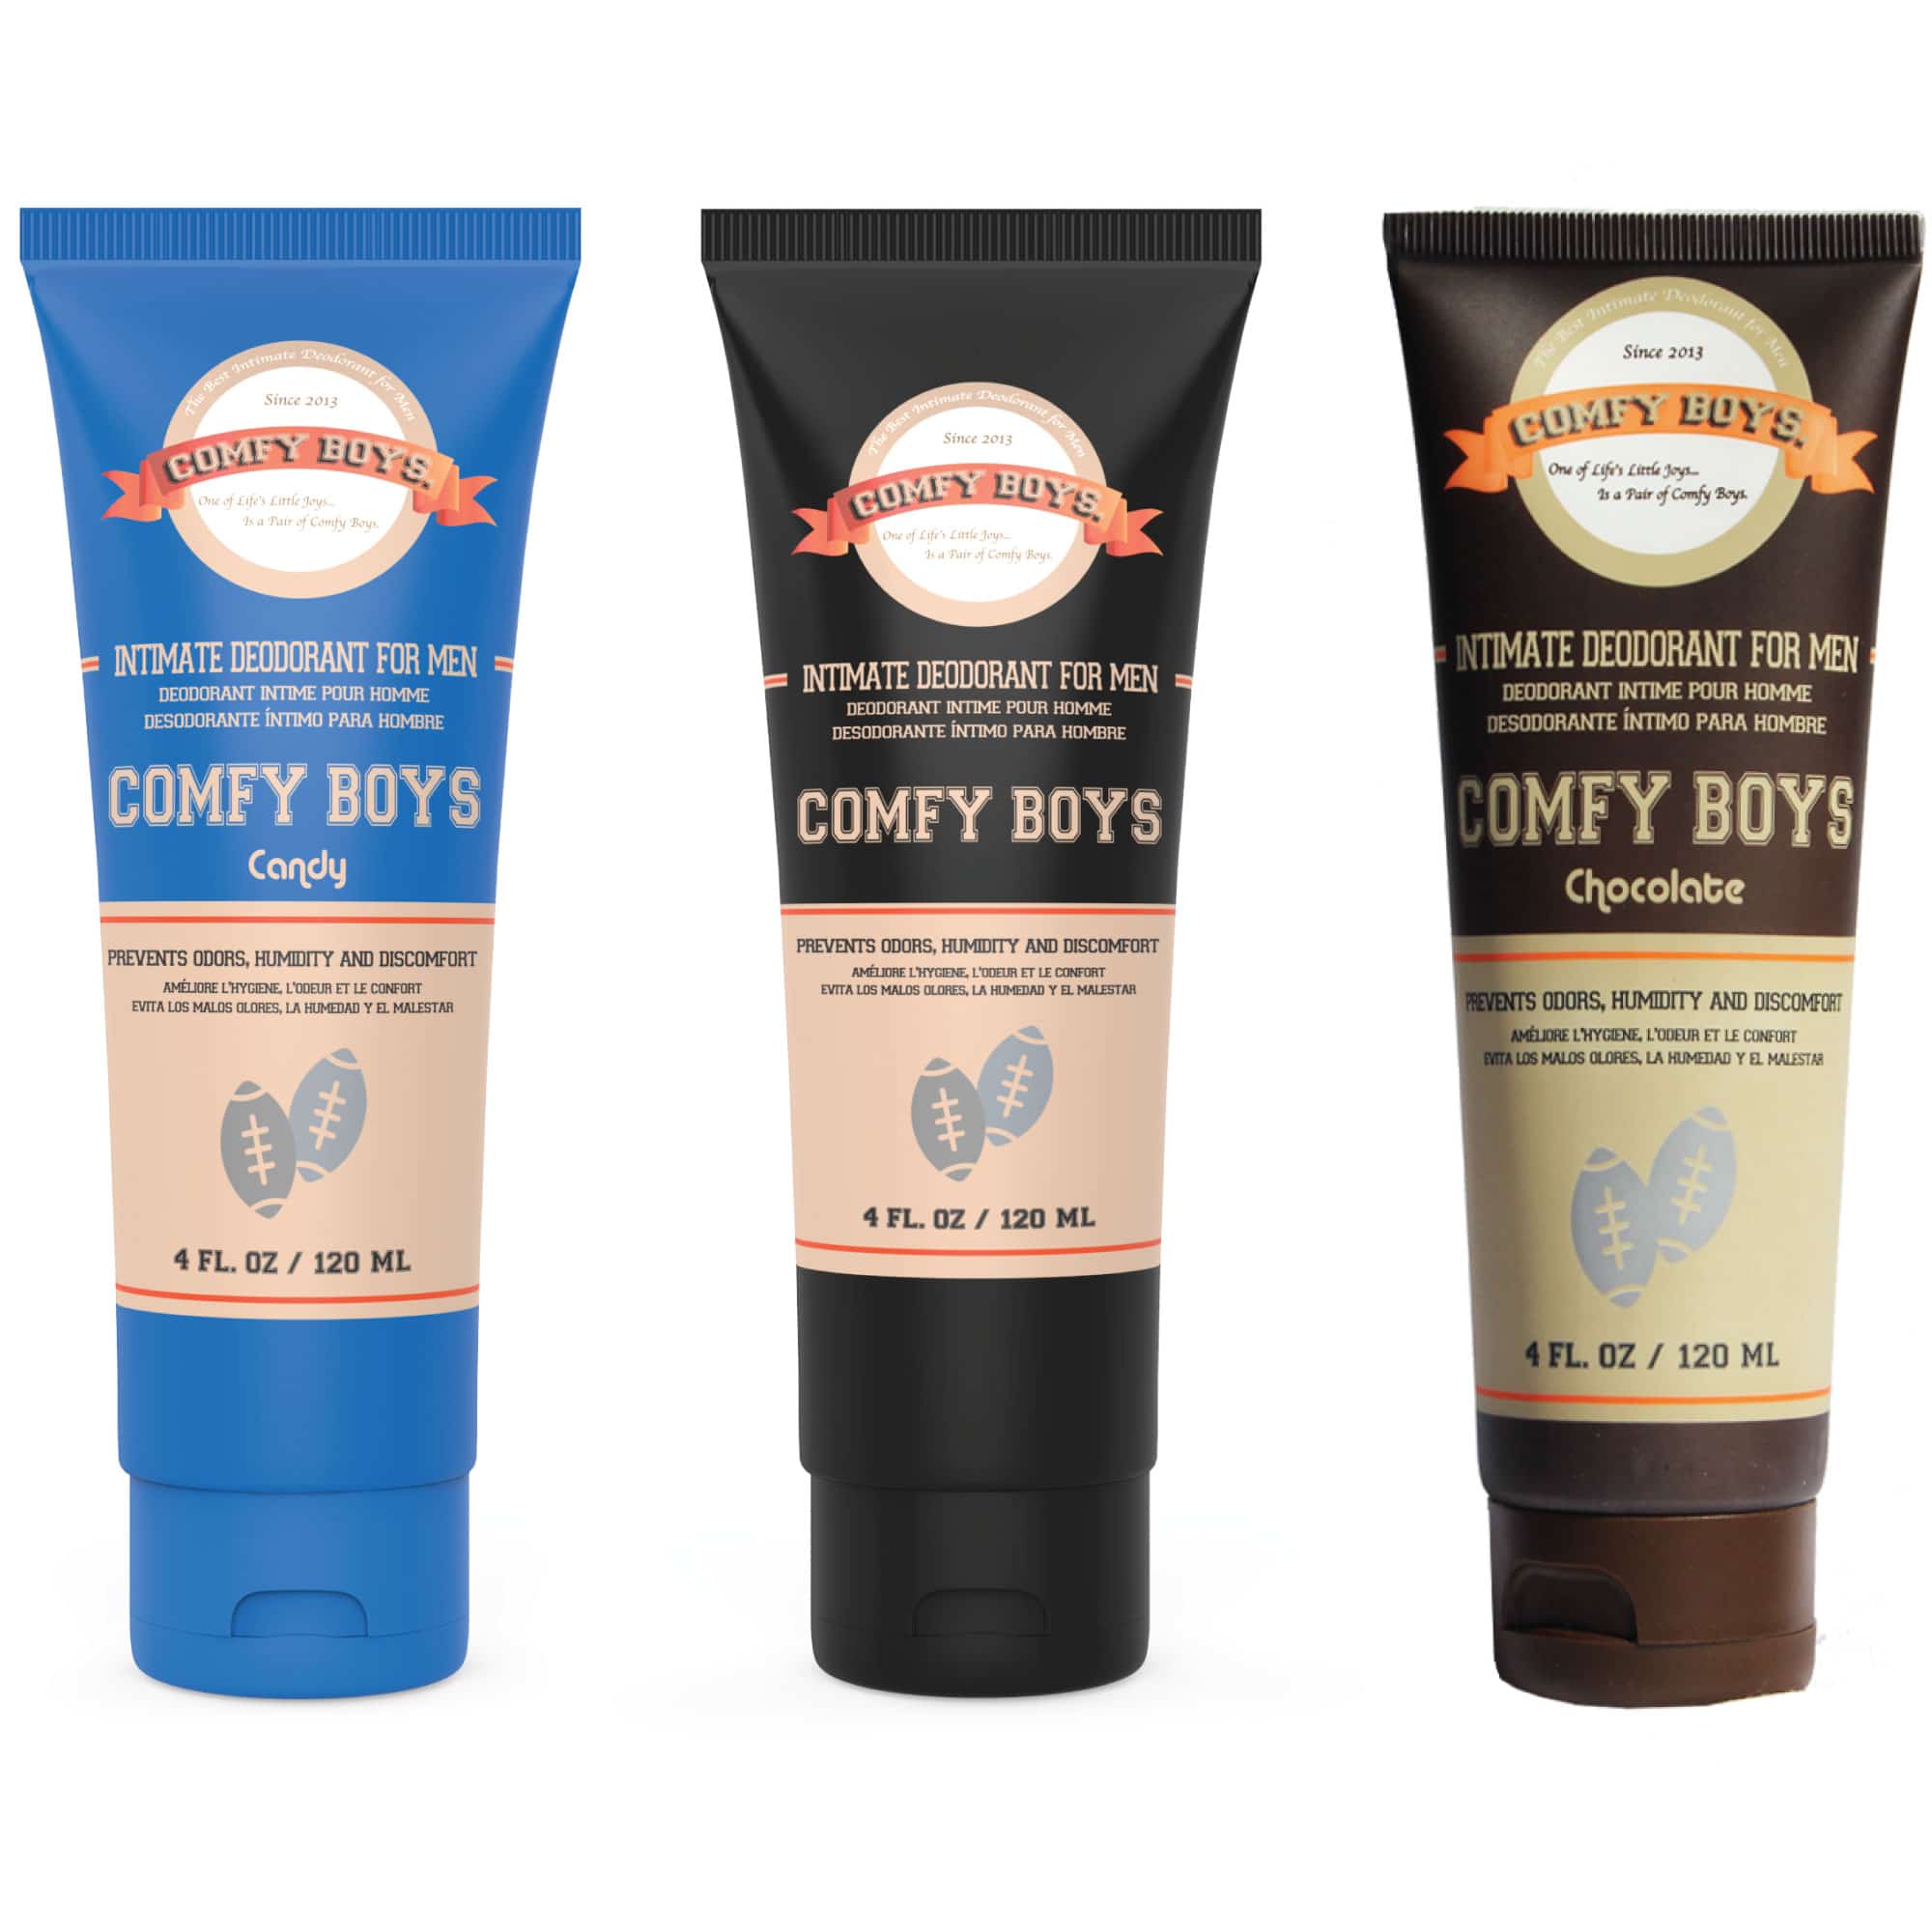 Comfy Boys Triple Discovery Pack - Classic + Candy + Chocolate - 4oz Each -  #1 Intimate Deodorant for Men